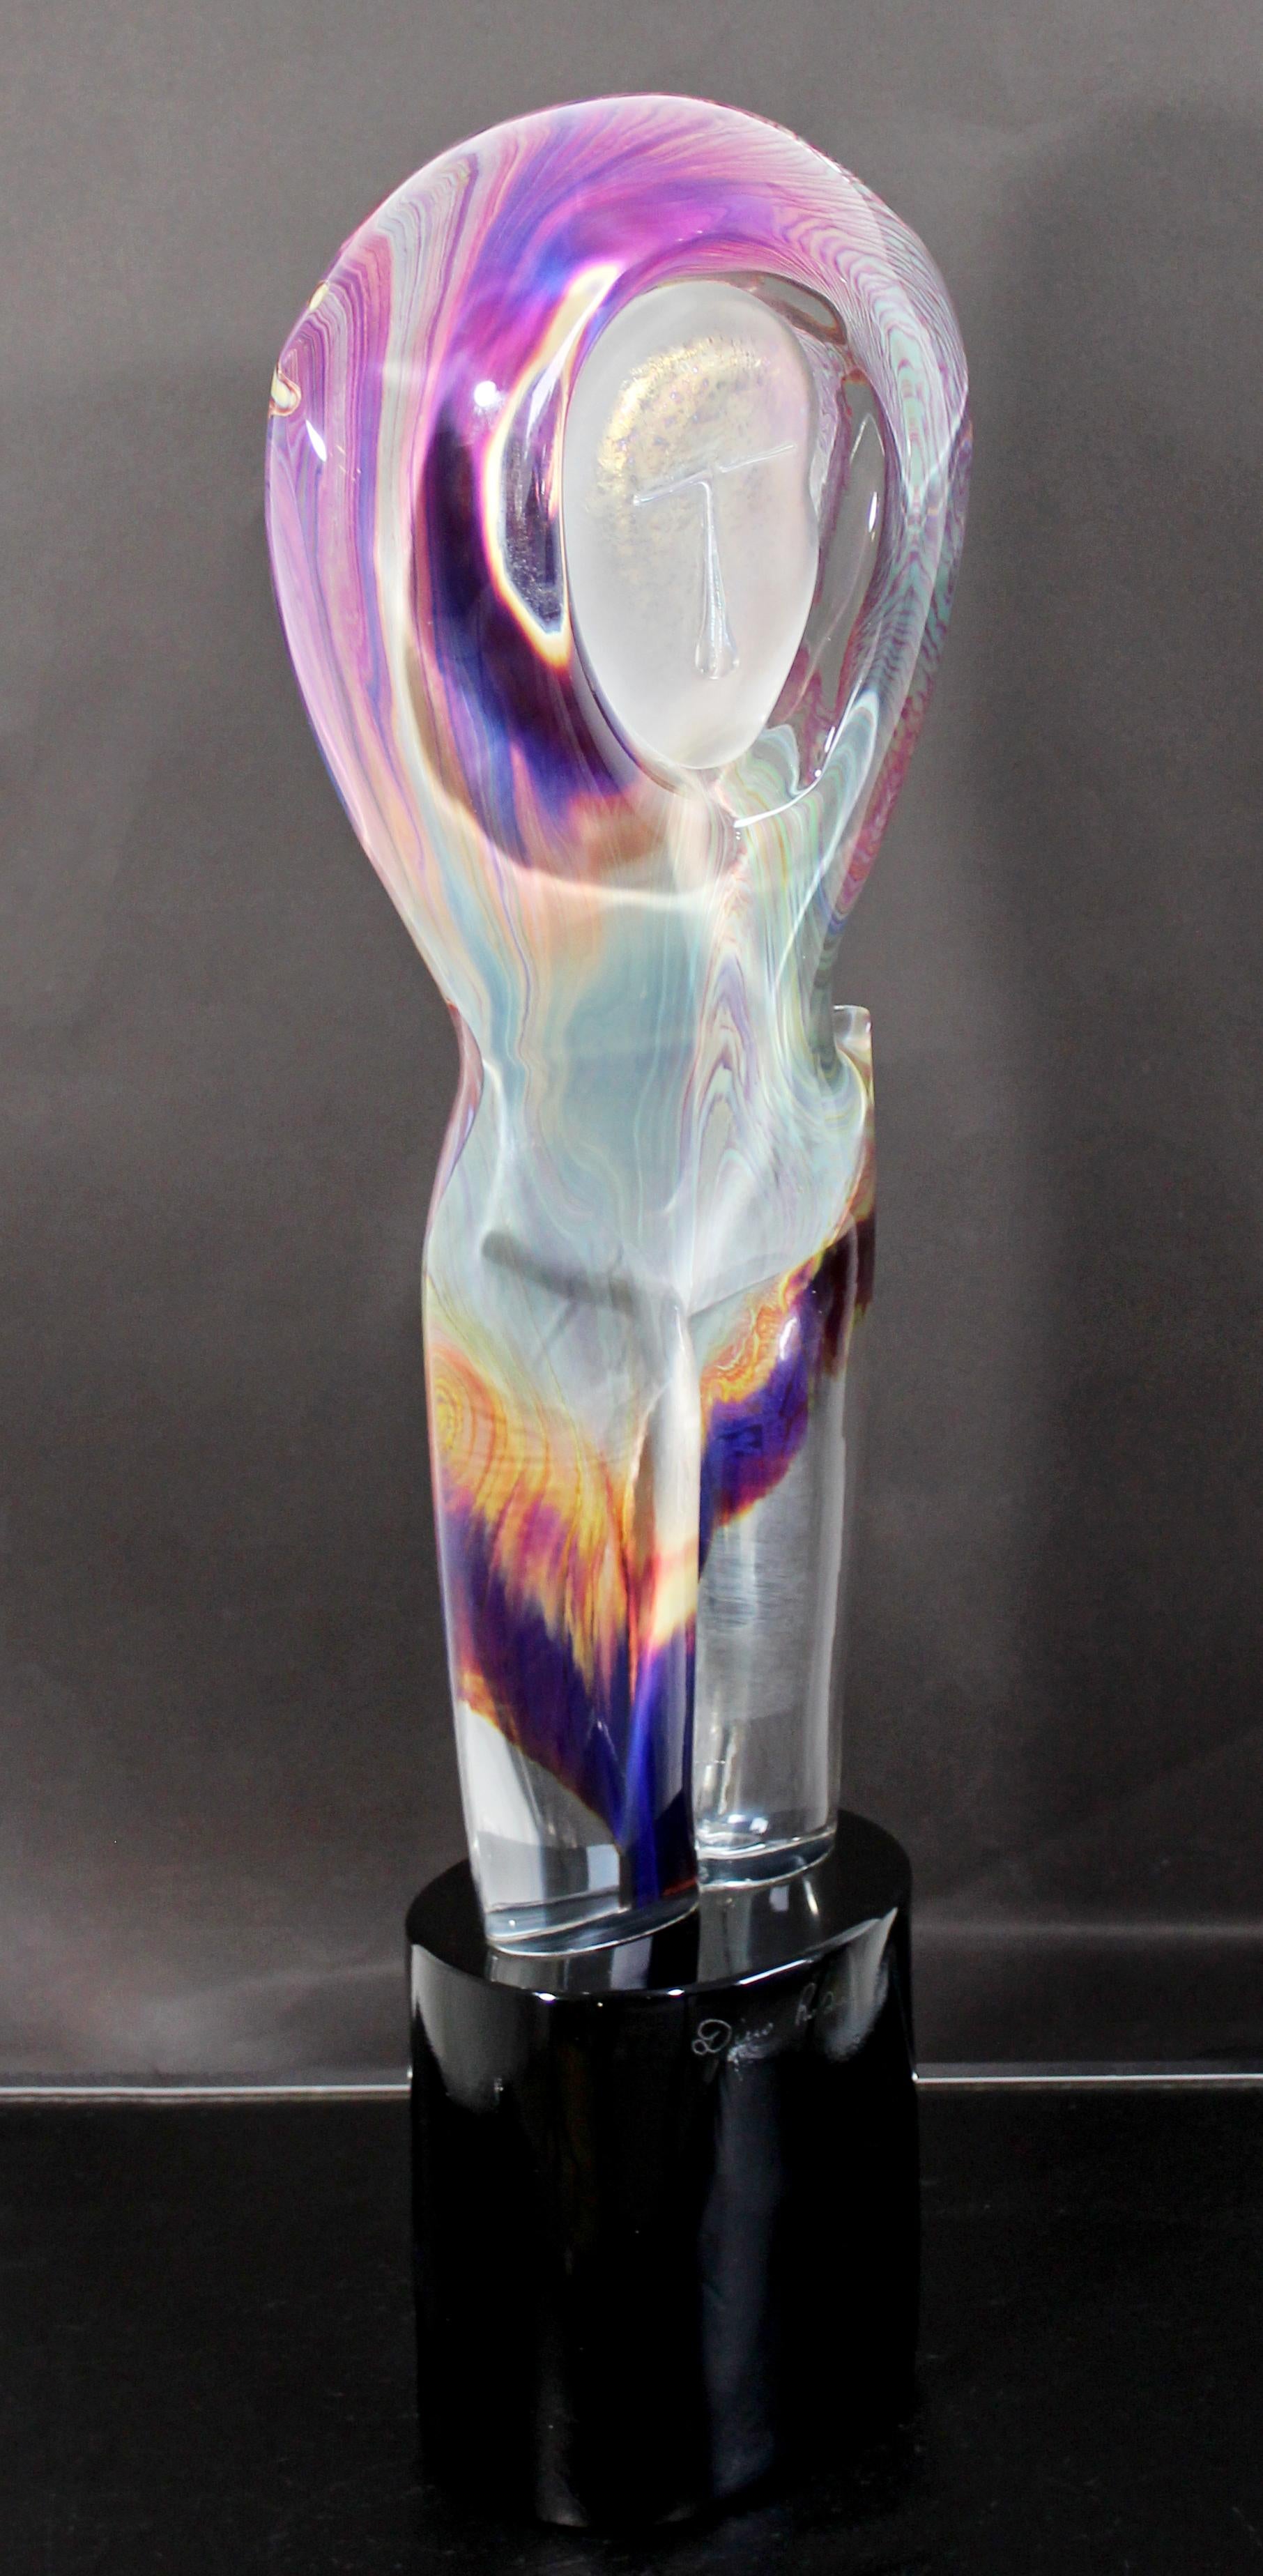 For your consideration is a breathtaking, Murano glass art table sculpture of a person, signed by Dino Rosin. In excellent condition. The dimensions are 11